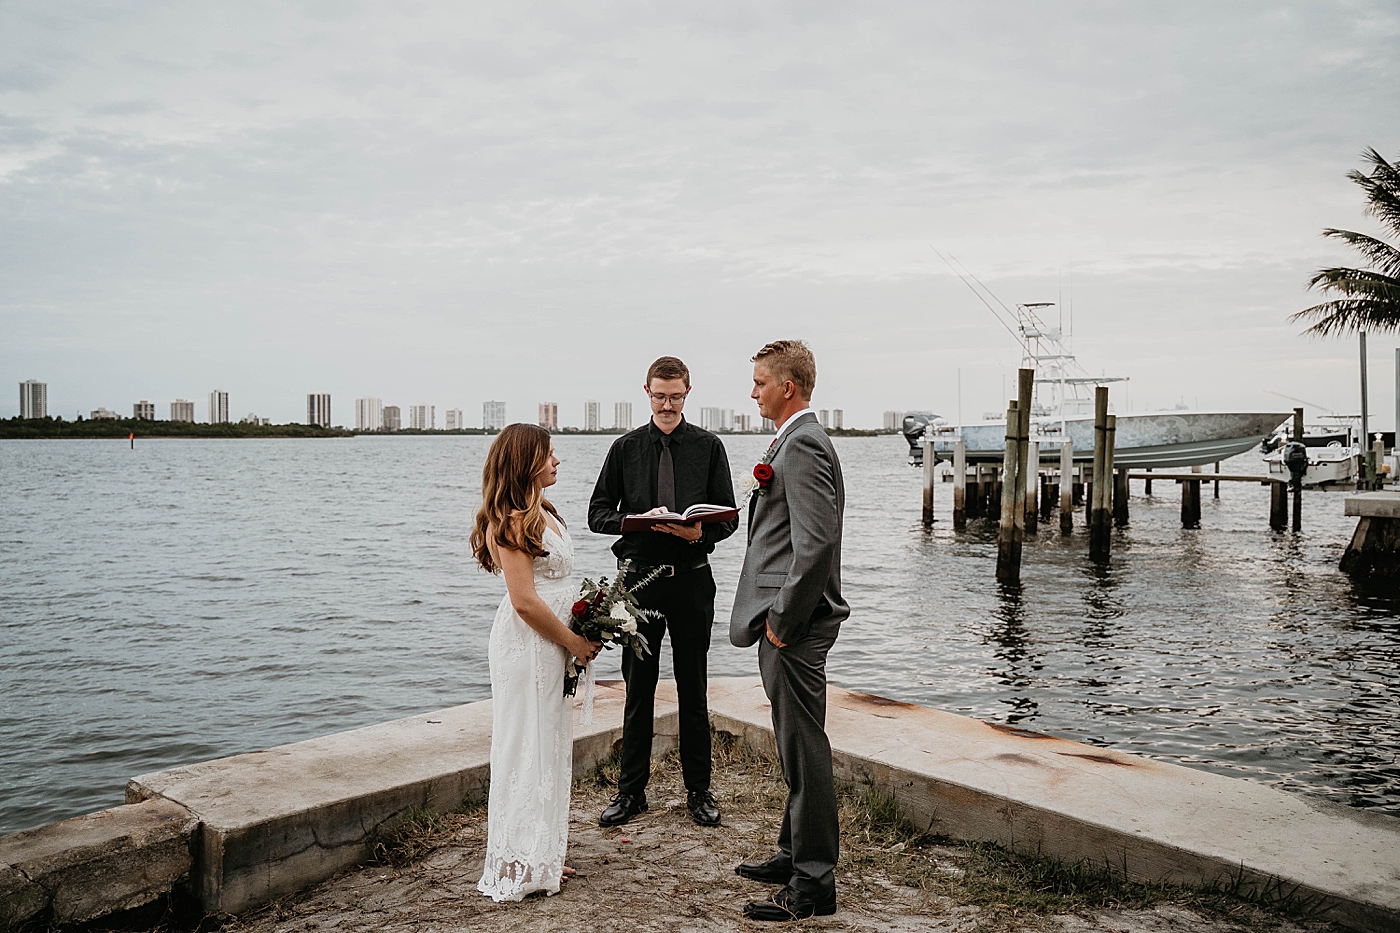 Eleopement Ceremony by the ocean side South Florida Elopement Photography captured by Krystal Capone Photography